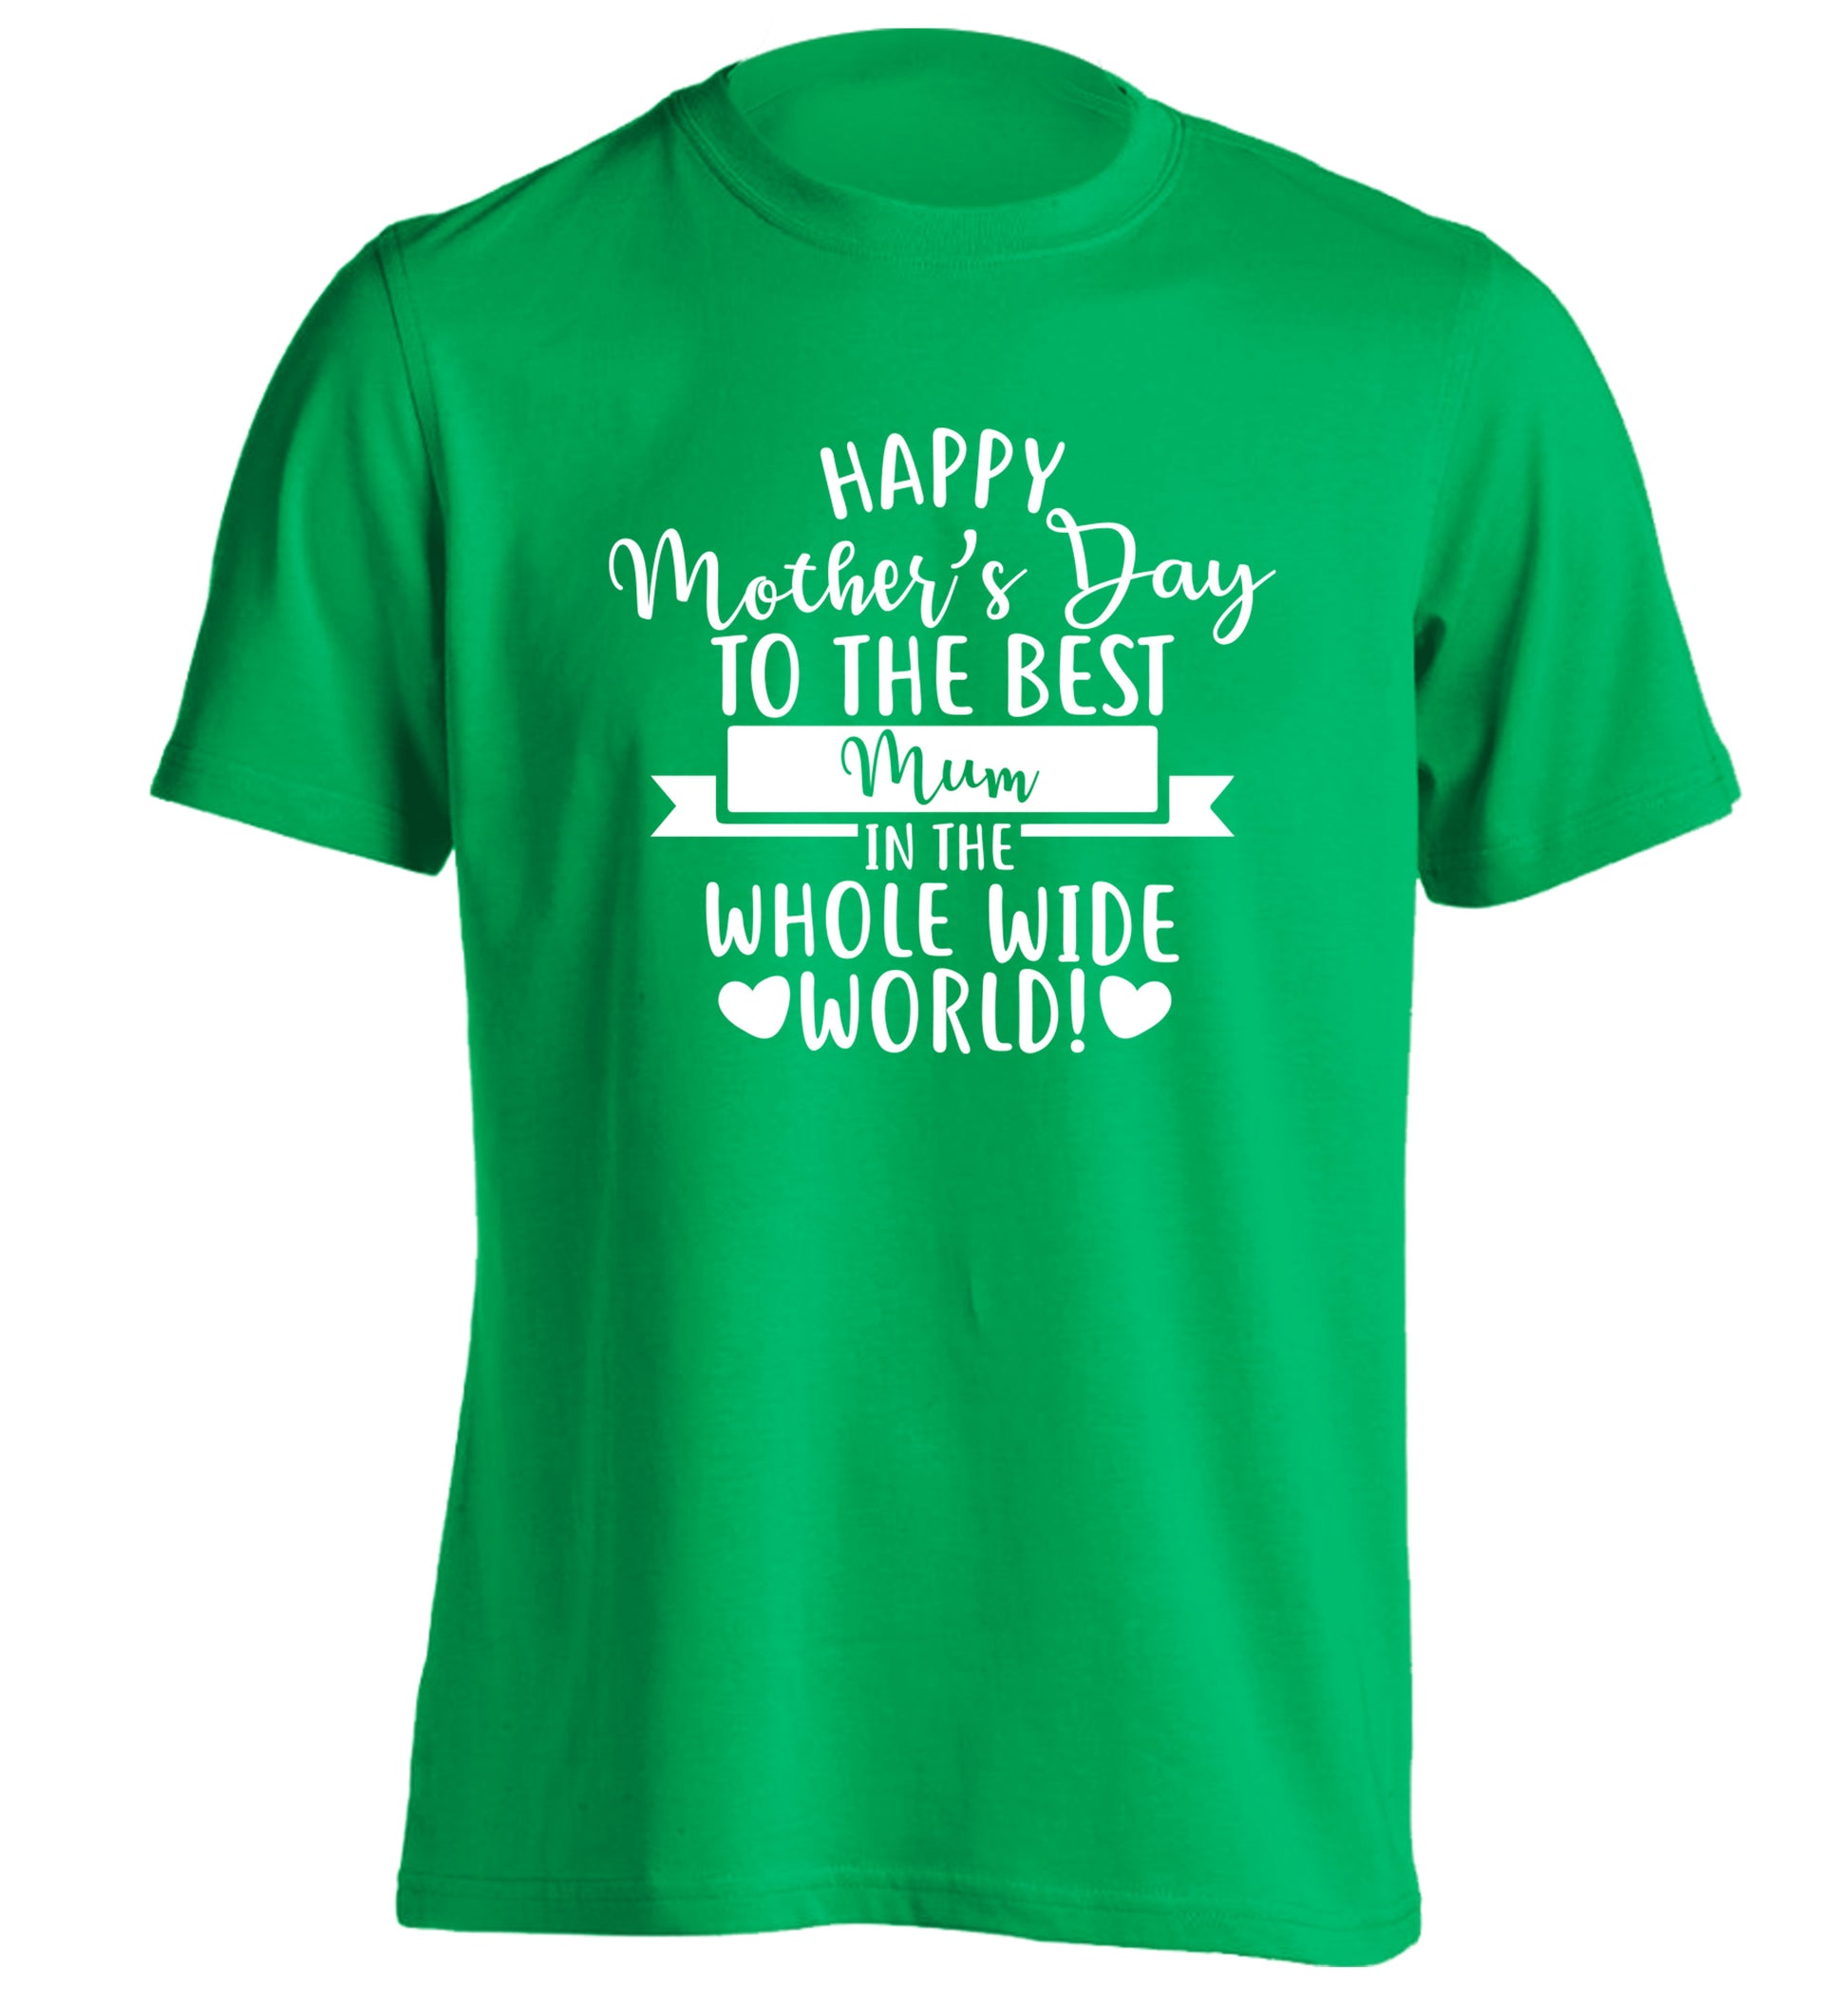 Happy Mother's Day to the best mum in the whole wide world! adults unisex green Tshirt 2XL